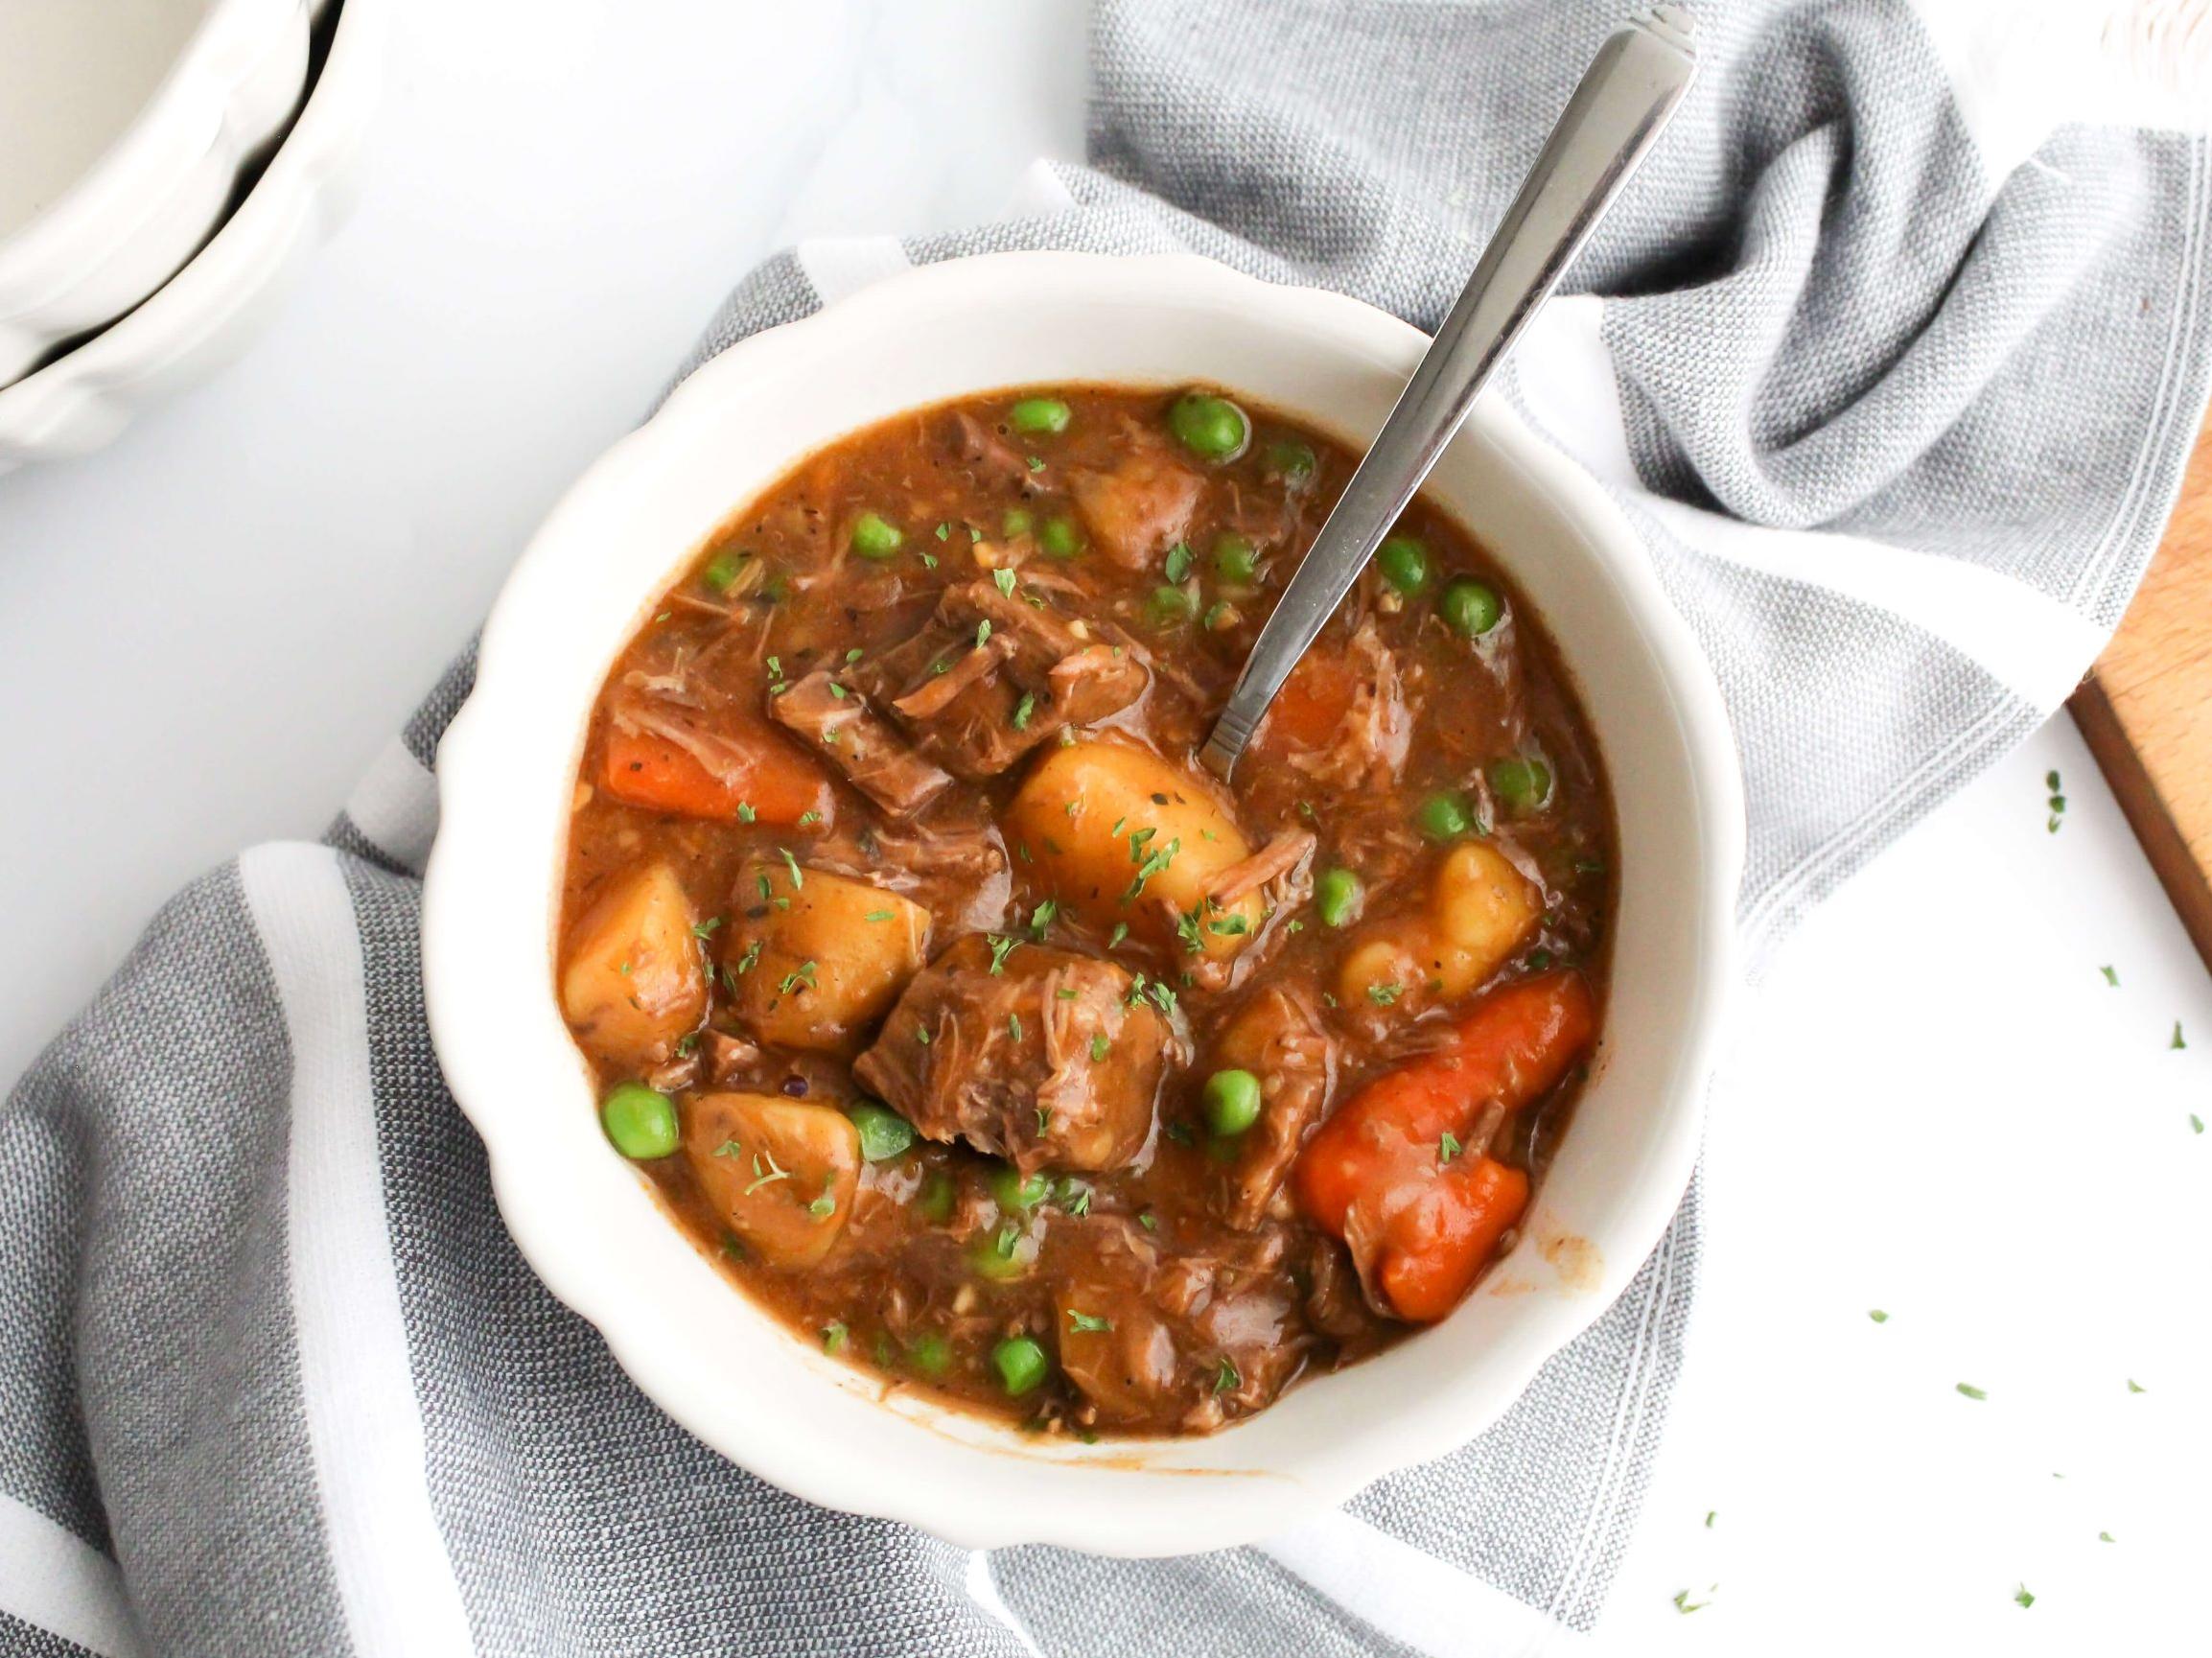  Traditional Irish beef stew that hits all the right spots.